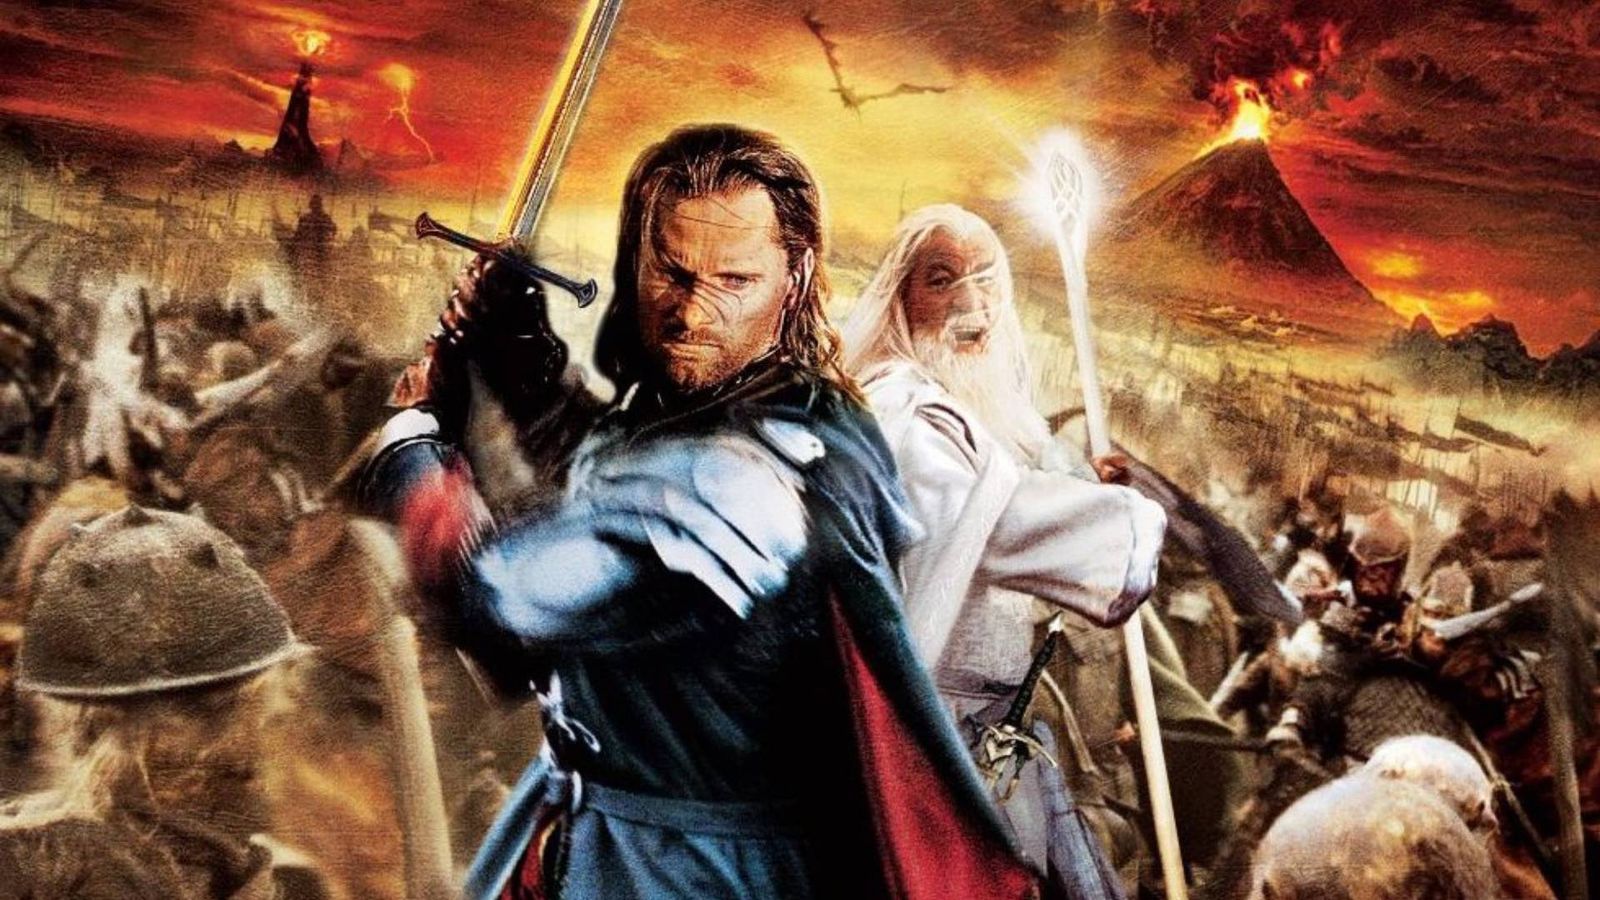 the lord of the rings is getting 5 new games in 1 year